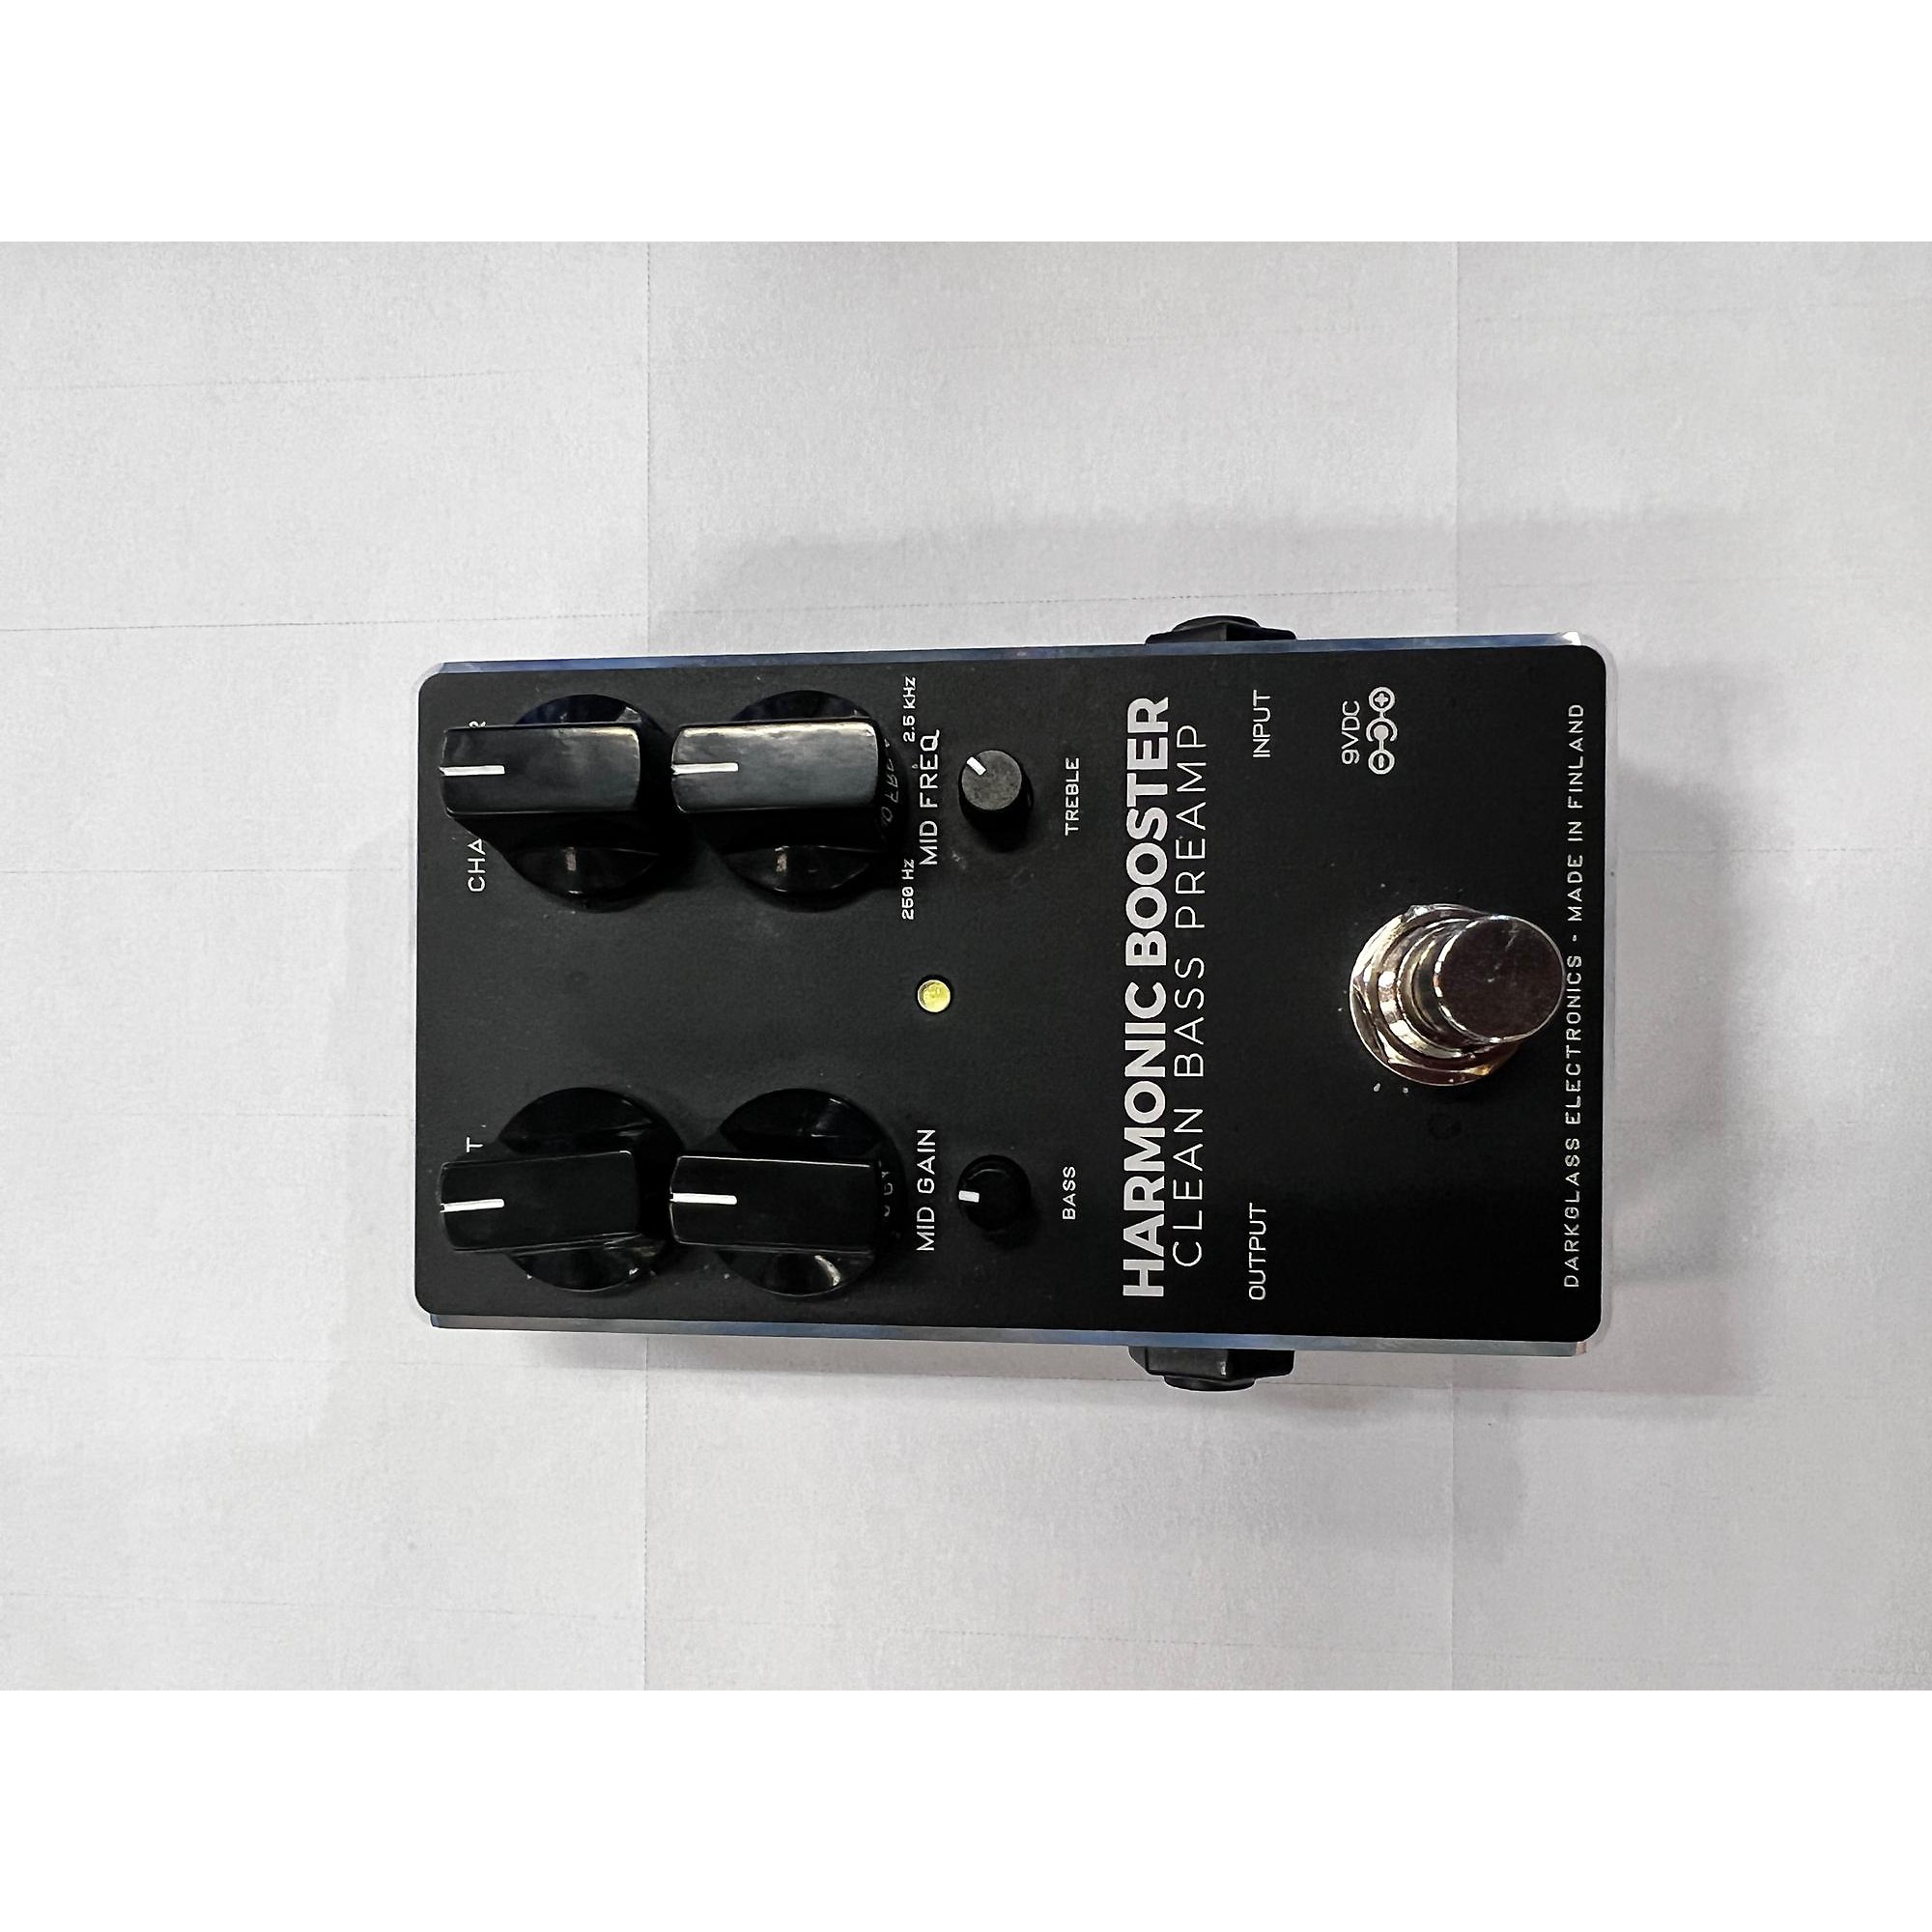 Used Darkglass Harmonic Booster Bass Preamp